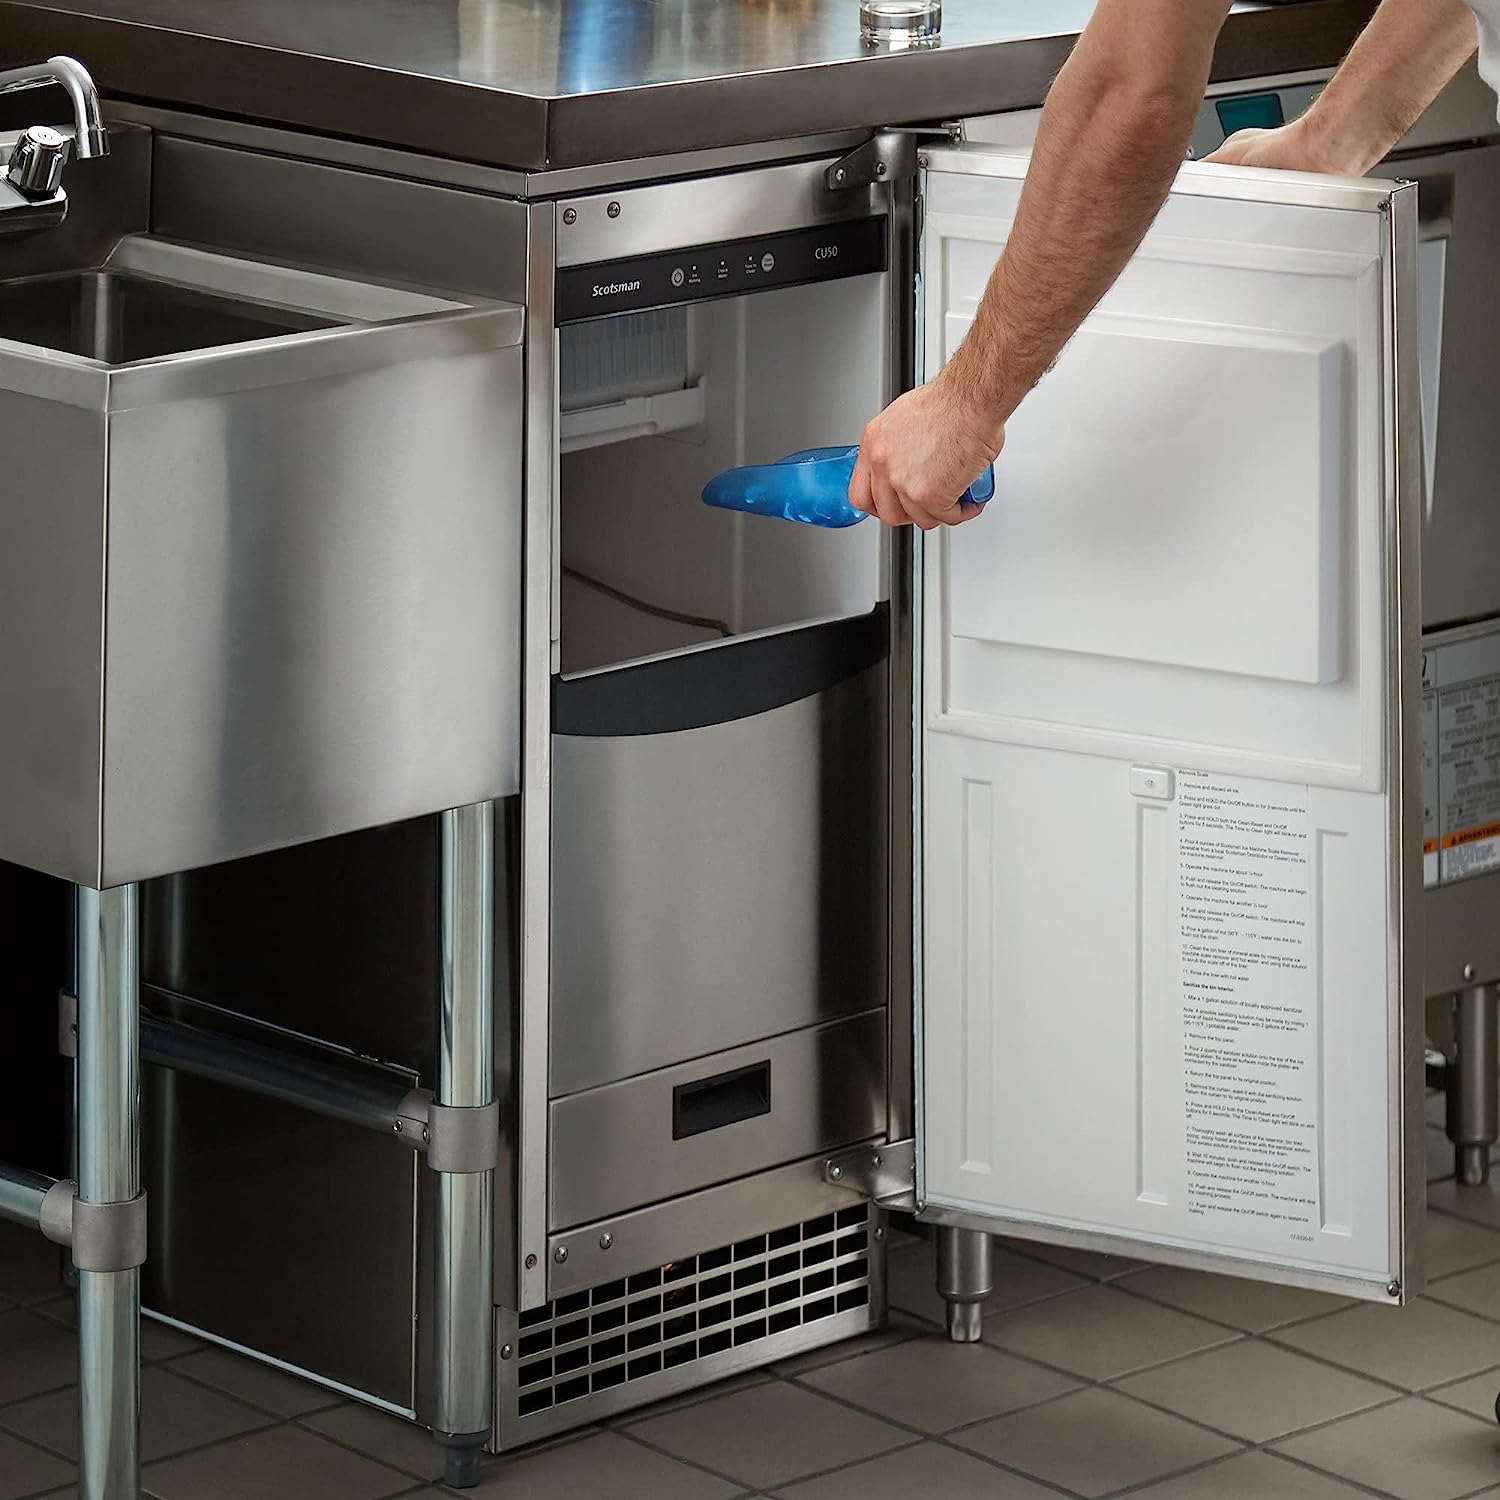 How To Clean A Scotsman Ice Maker